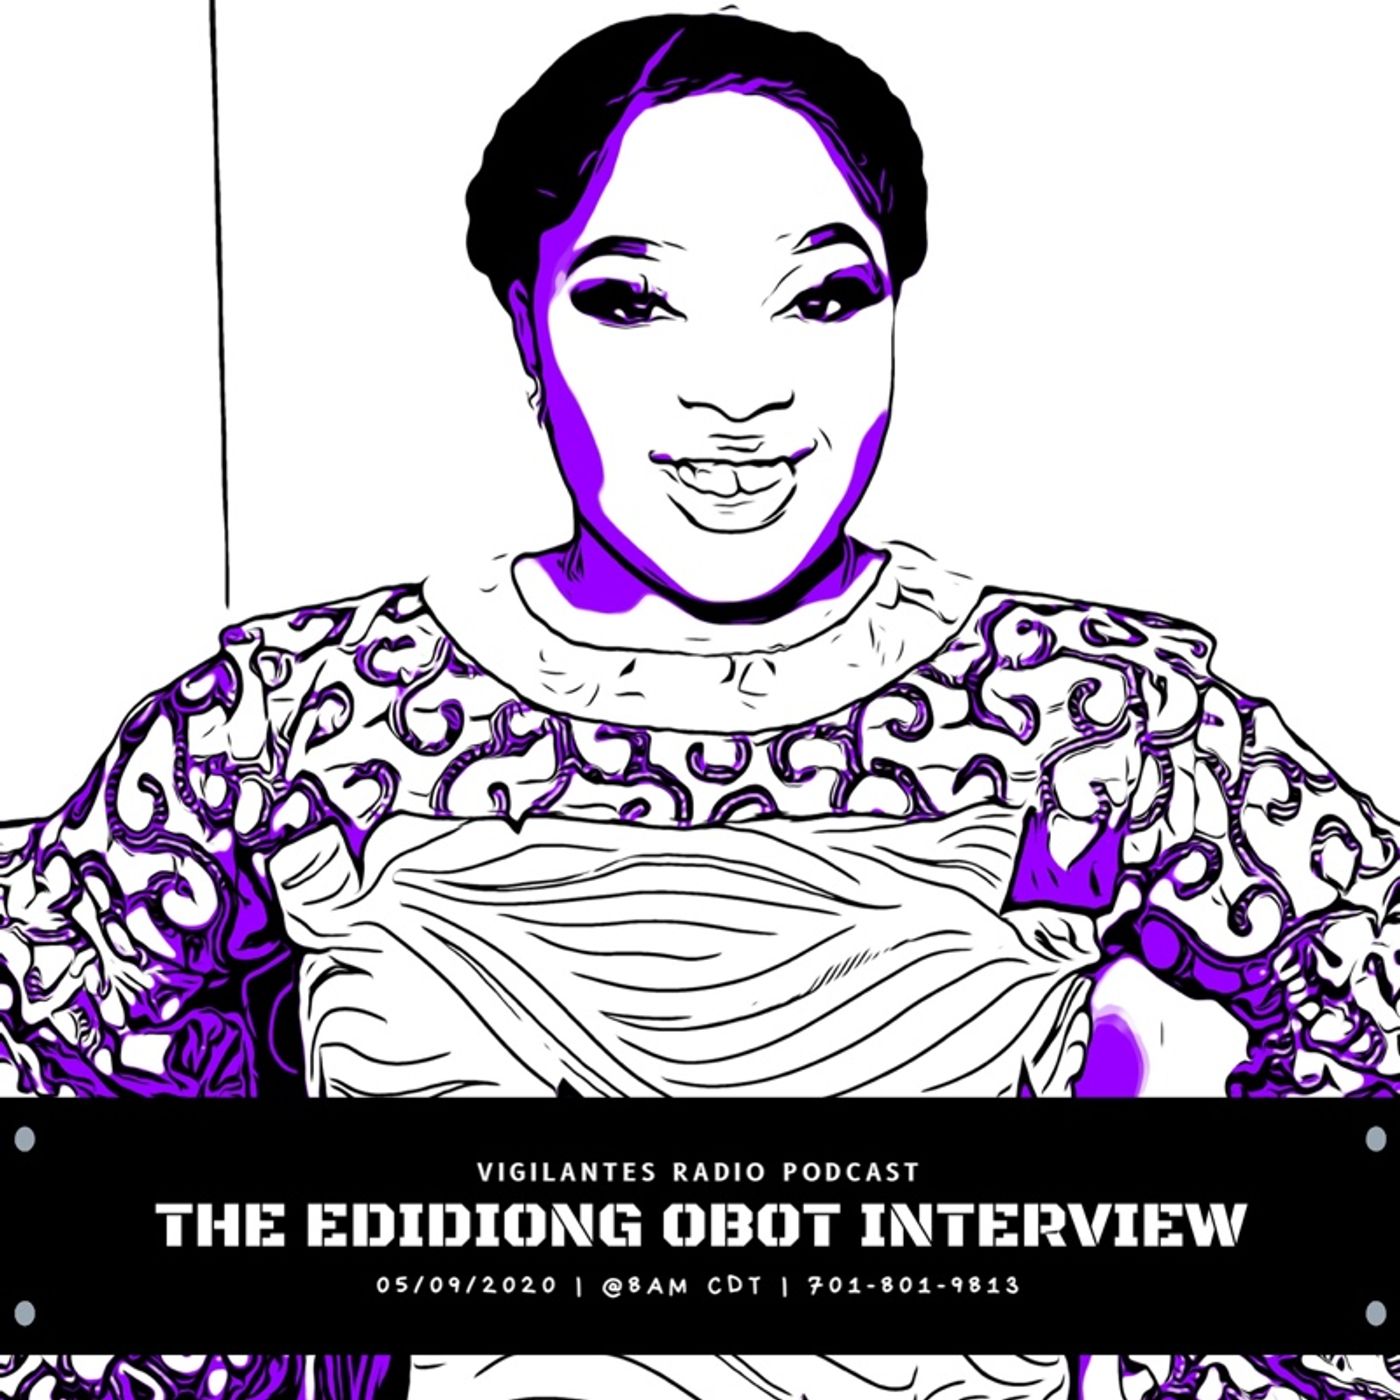 The Edidiong Obot Interview. Image